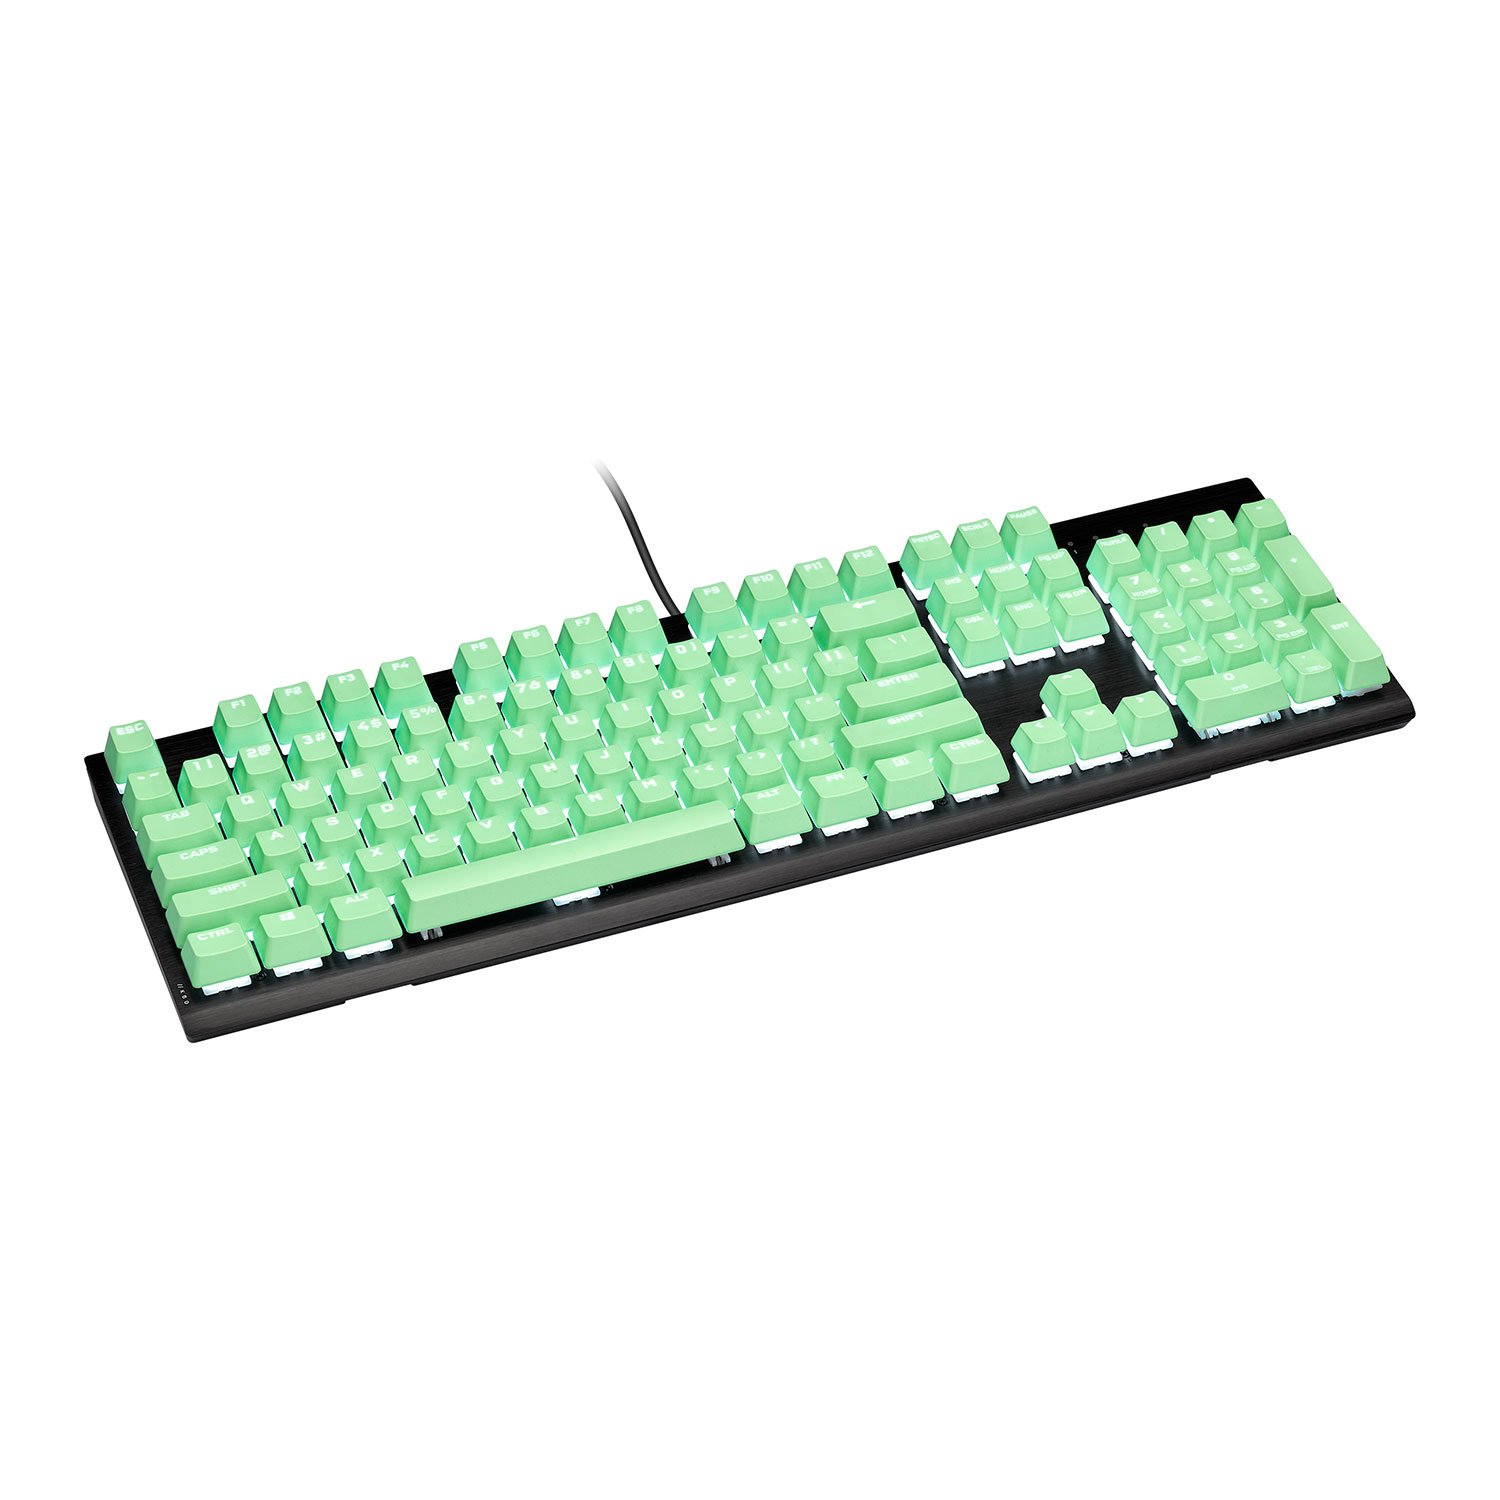 Corsair Ch-9911080-Na Pbt Double-Shot Pro Keycap Mod Kit – Mint Green – Heavy-Duty Pbt Plastic With Textured Surface Thick 1.5mm Double-Shot Walls With Backlit Font O-Ring Dampeners Included For Quieter Keystrokes 104 Backlit Keys With Puller